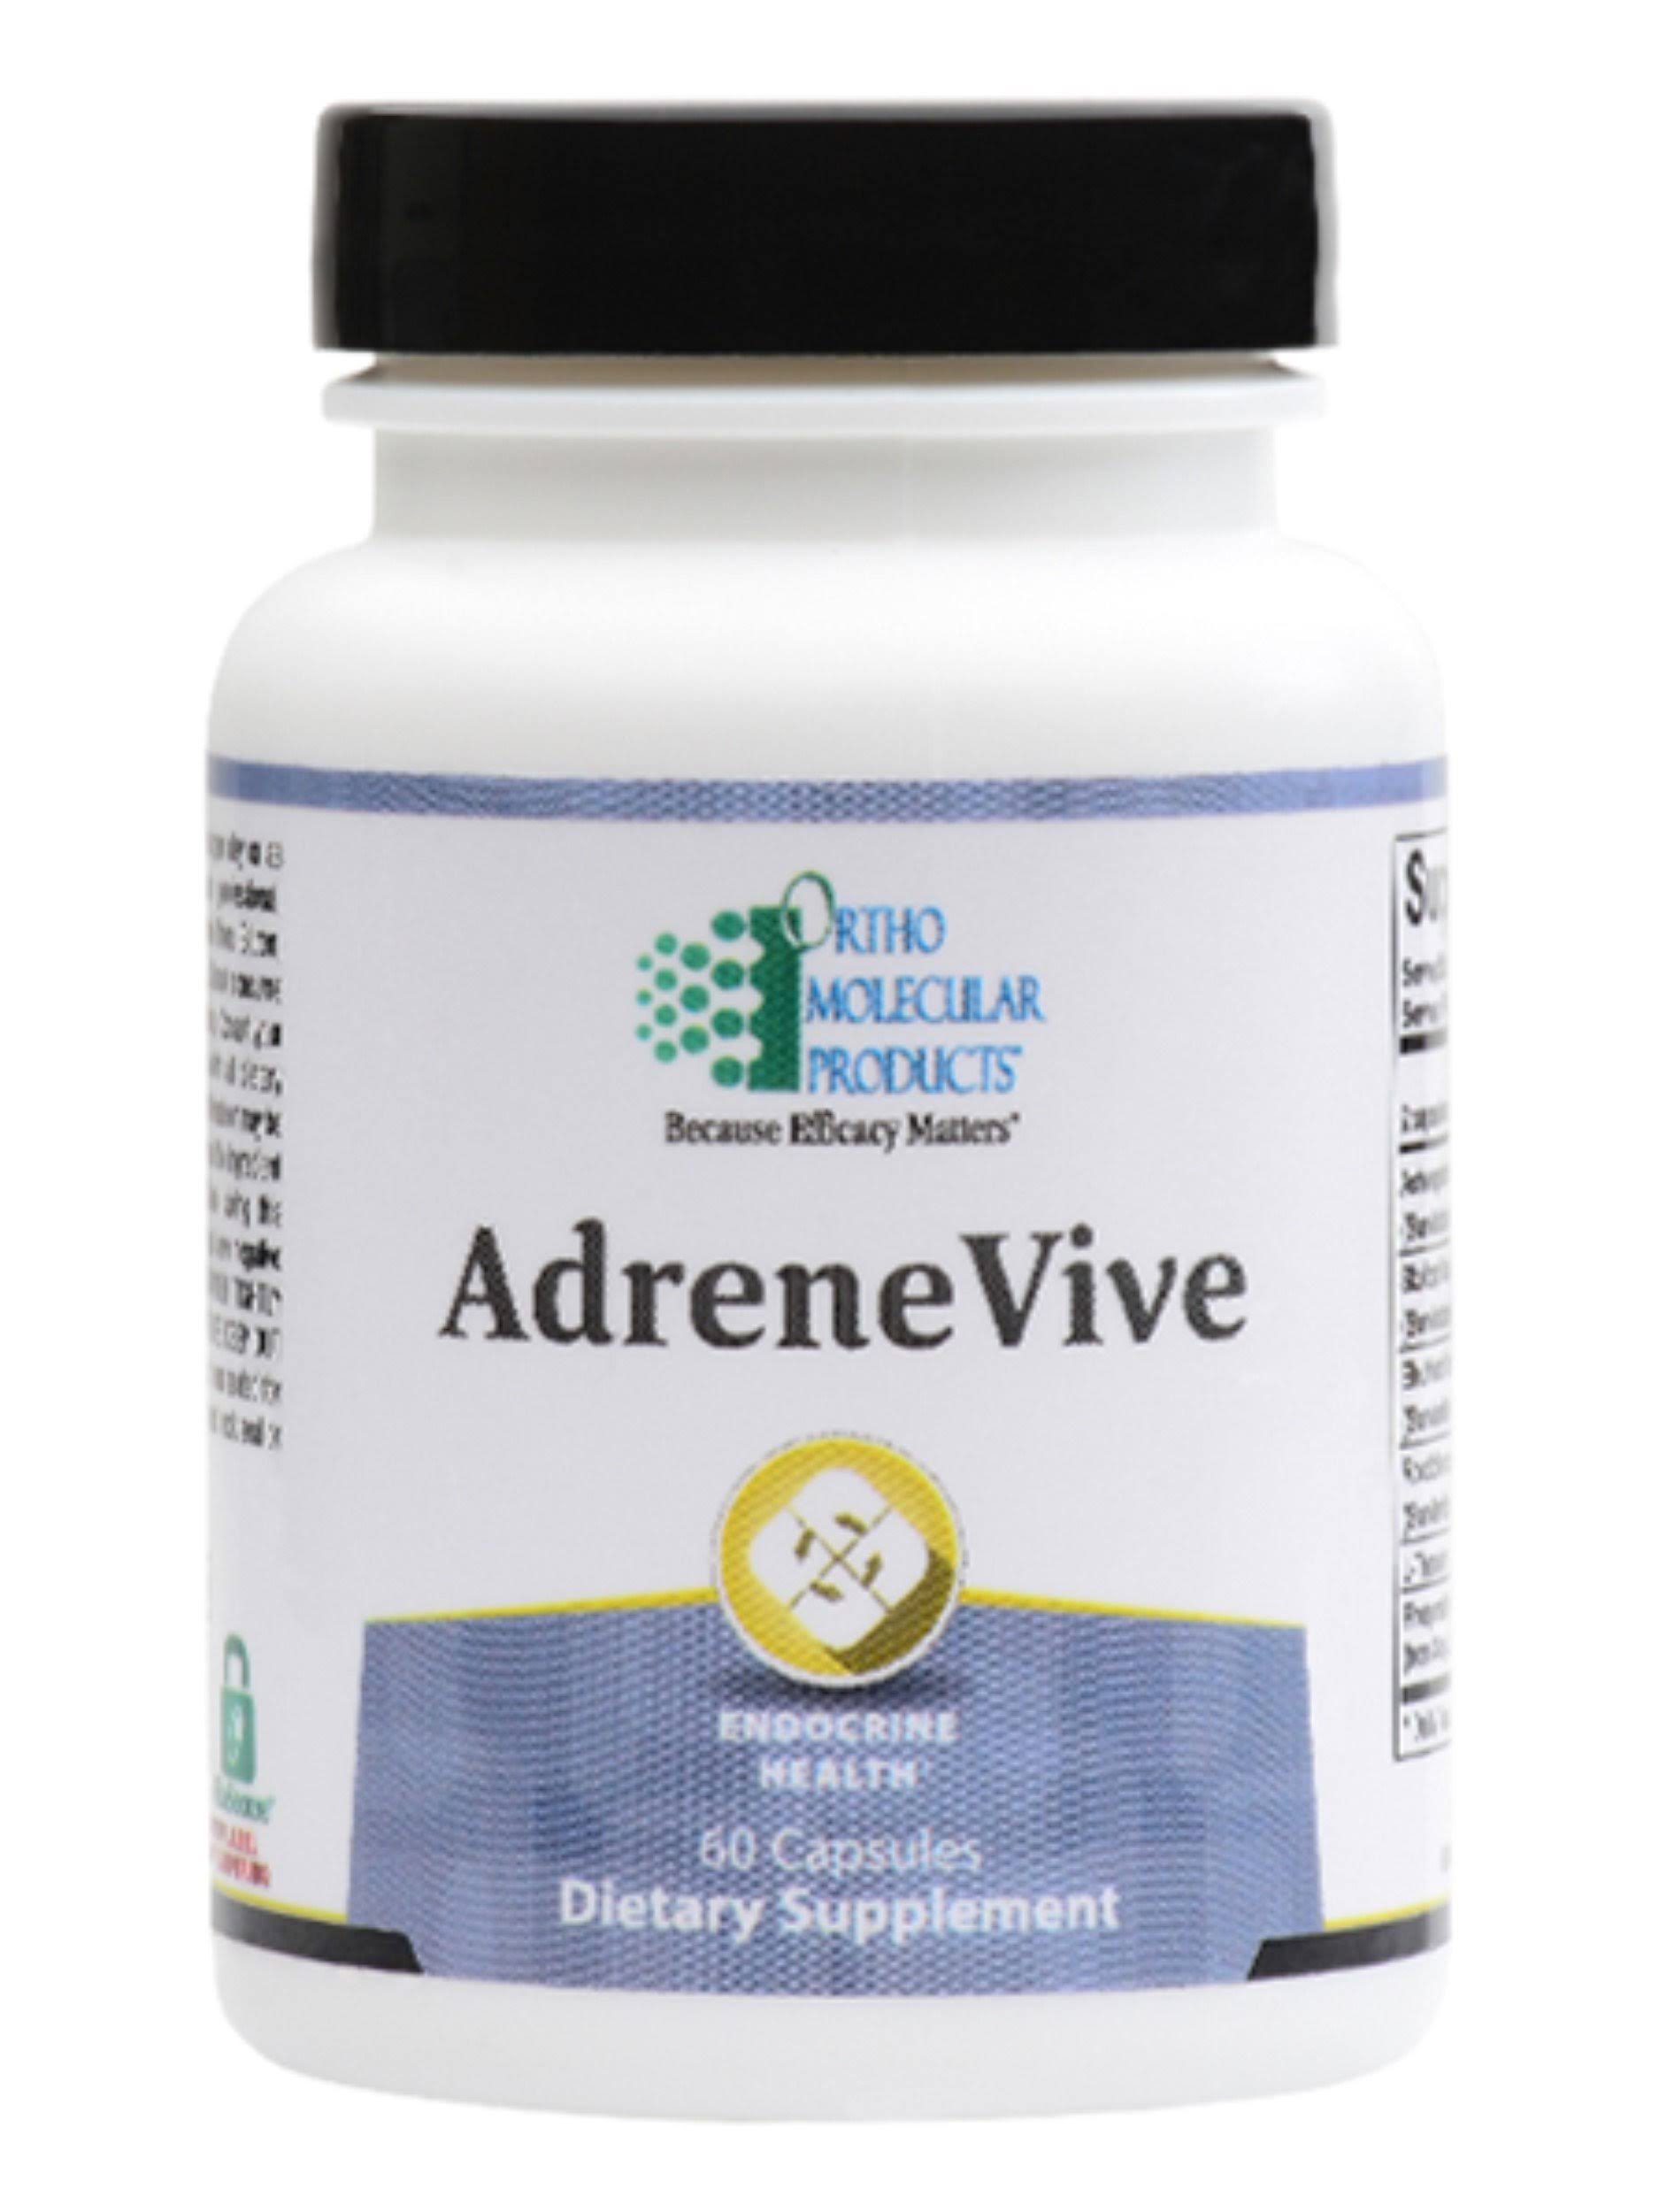 Ortho Molecular Products Adrene Vive - 60 Capsules